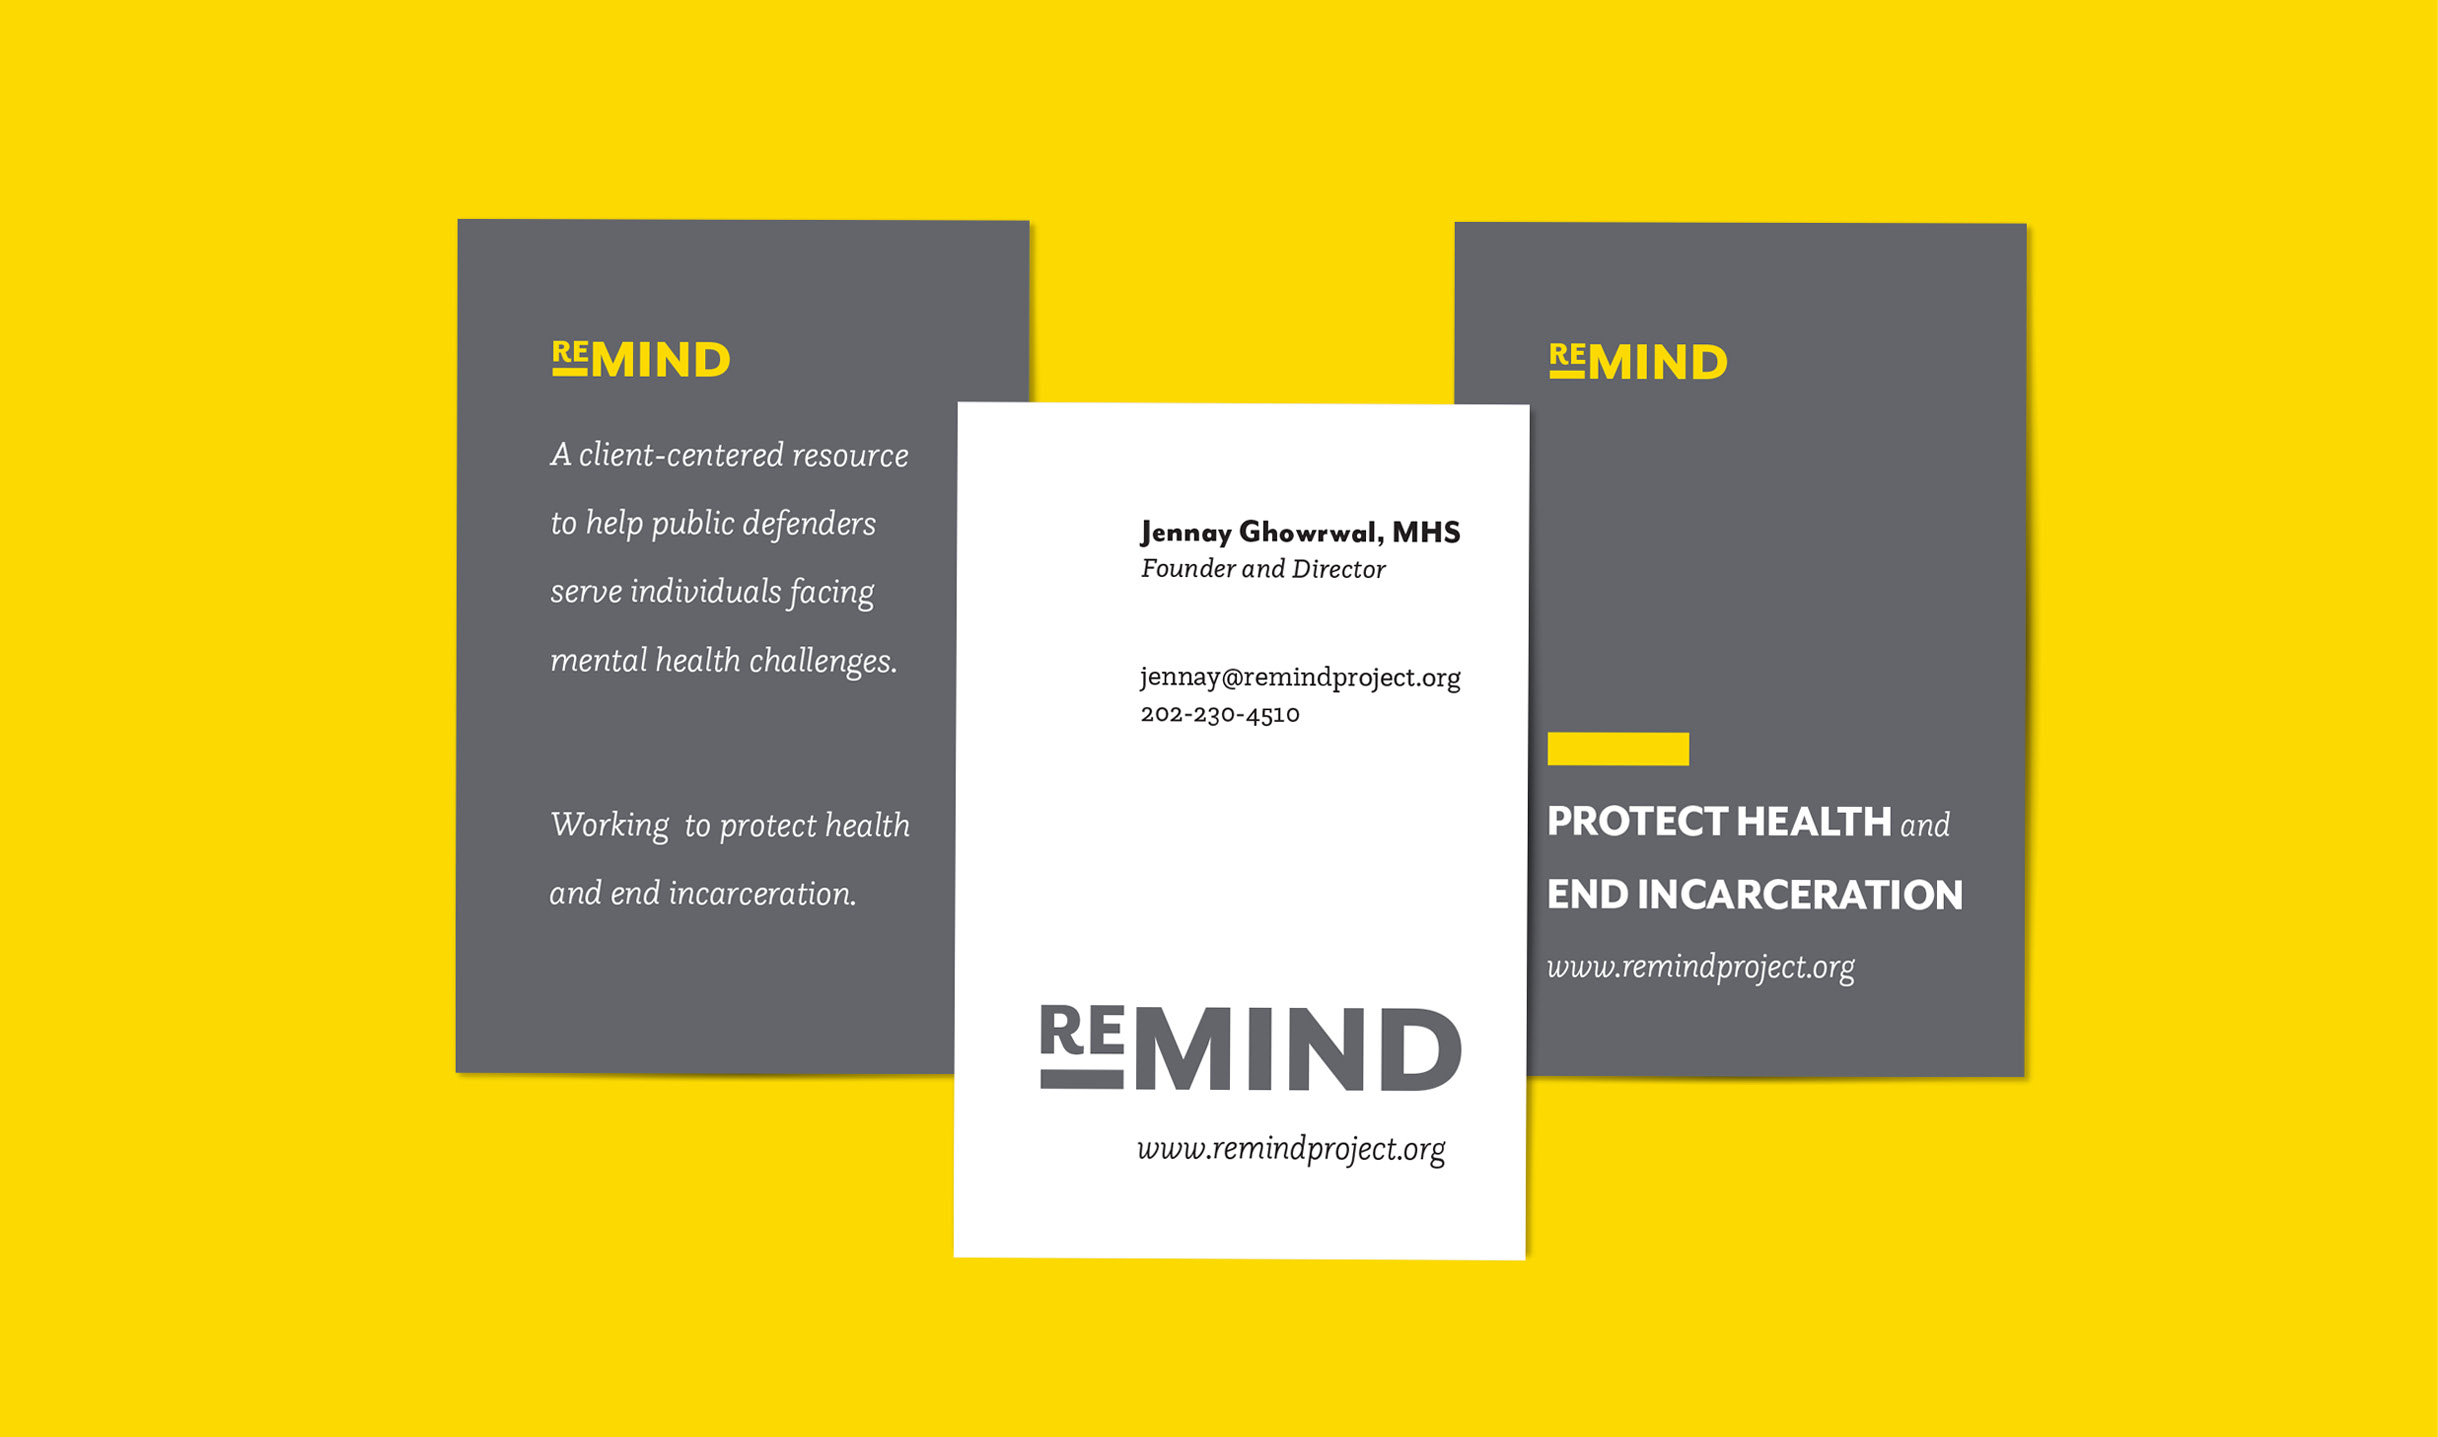 Examples of the ReMIND business cards. The front of the business cards are white with the logo and contact information, and the backs are gray with the mission station on them. They lay on yellow background.